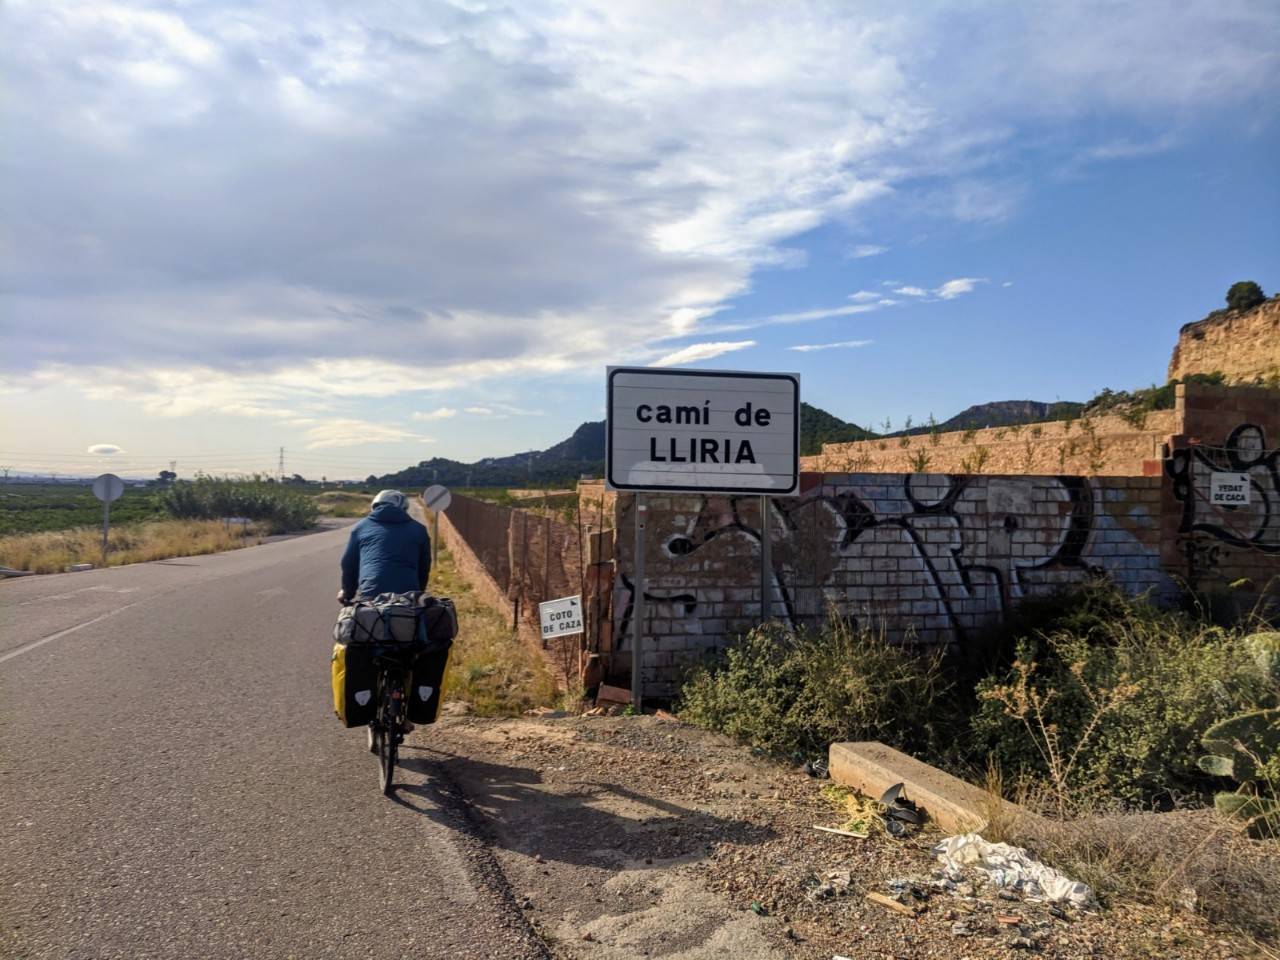 We've got a bit of wind: cycling from Barcelona to Valencia 🚴‍♂️🚴🏻‍♂️🇪🇸 in 4 days